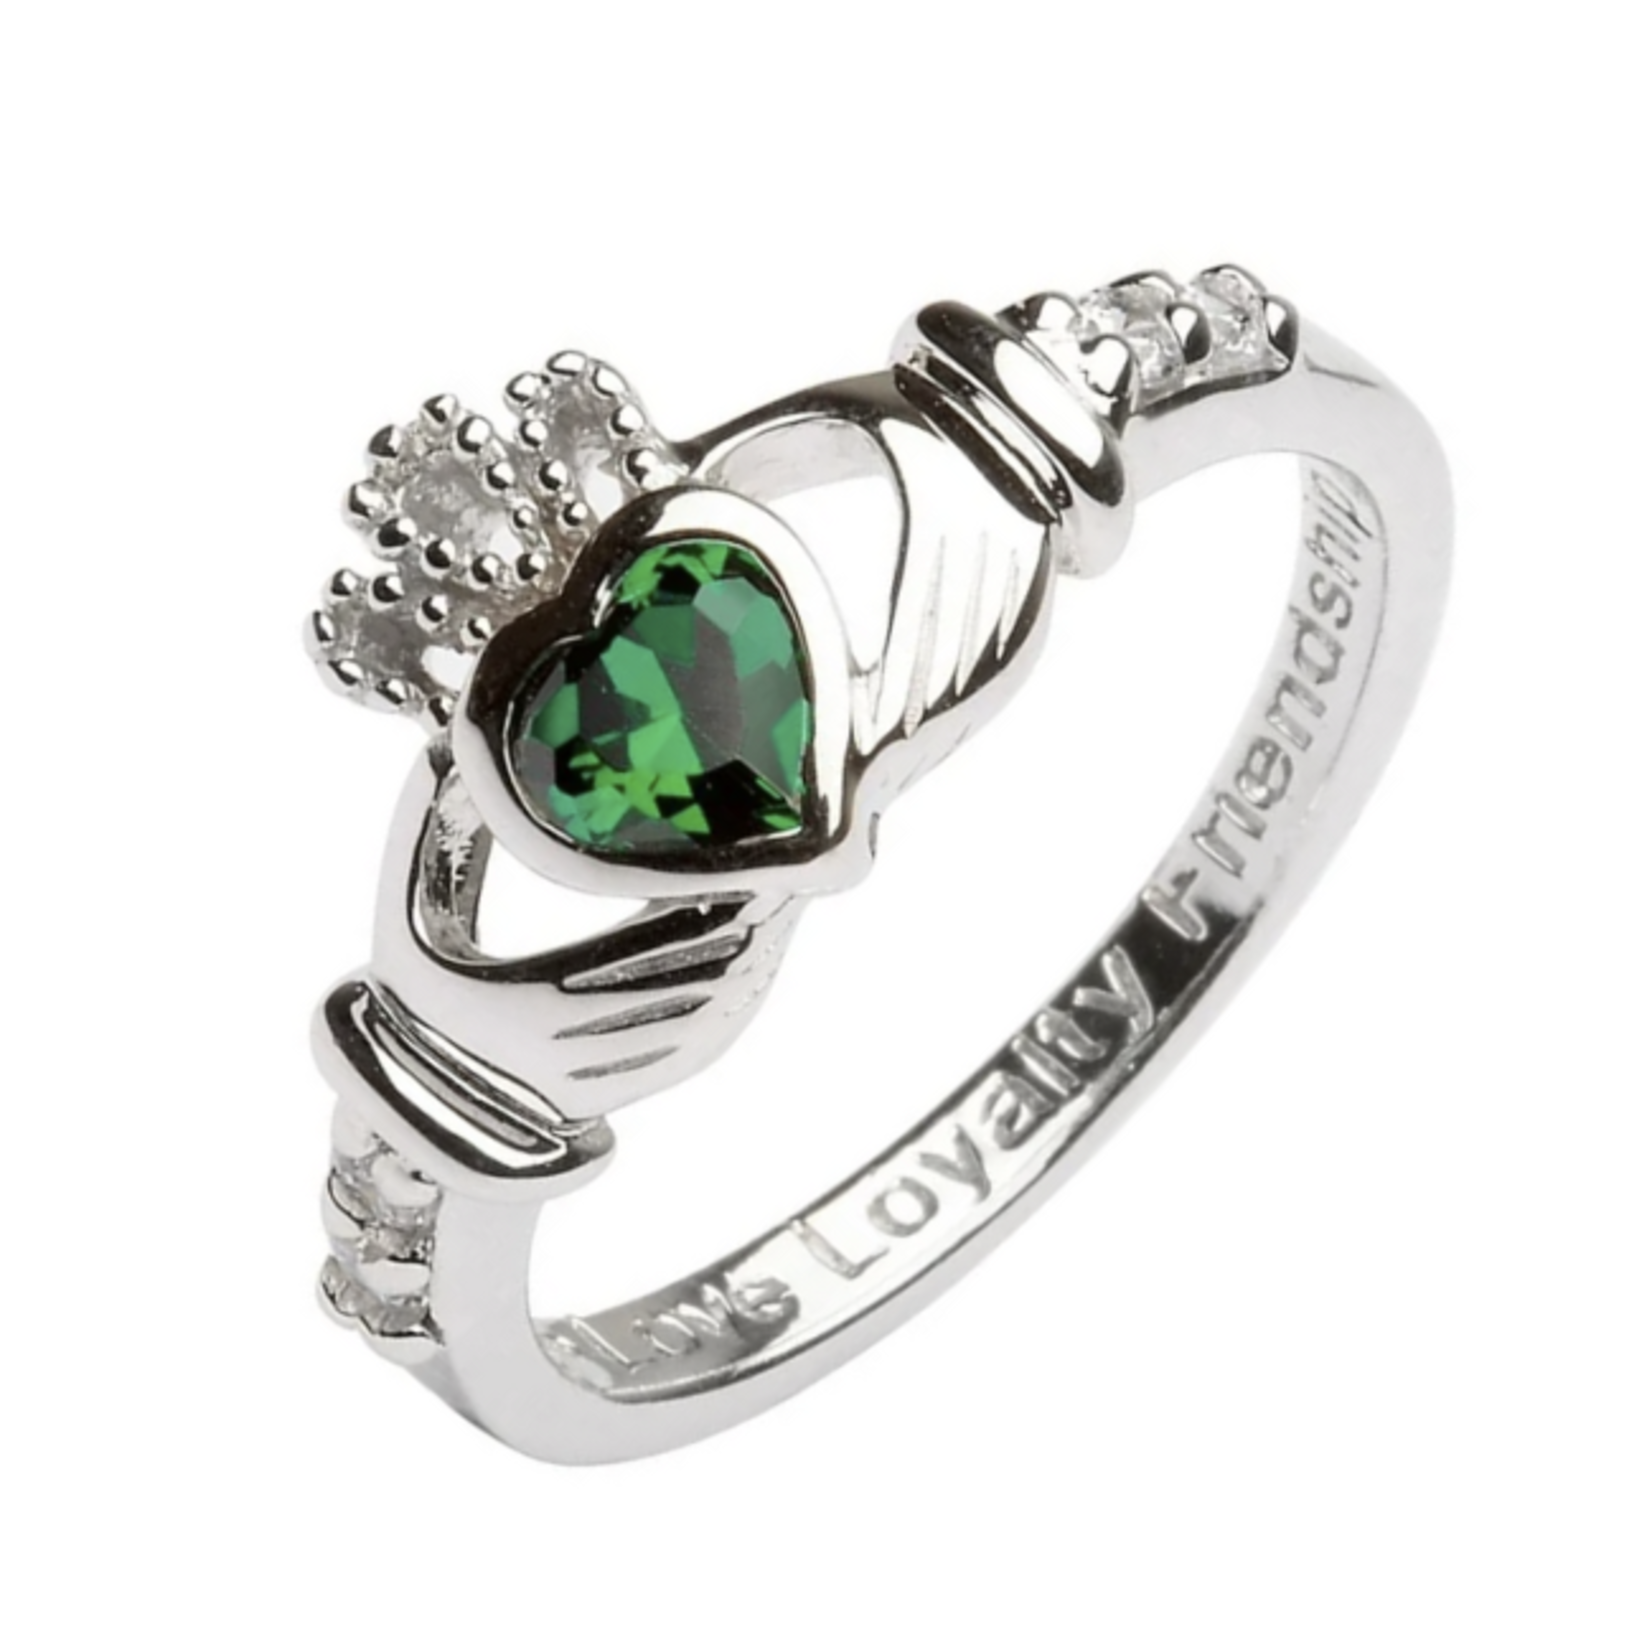 Shanore S/S May Claddagh Birthstone Ring